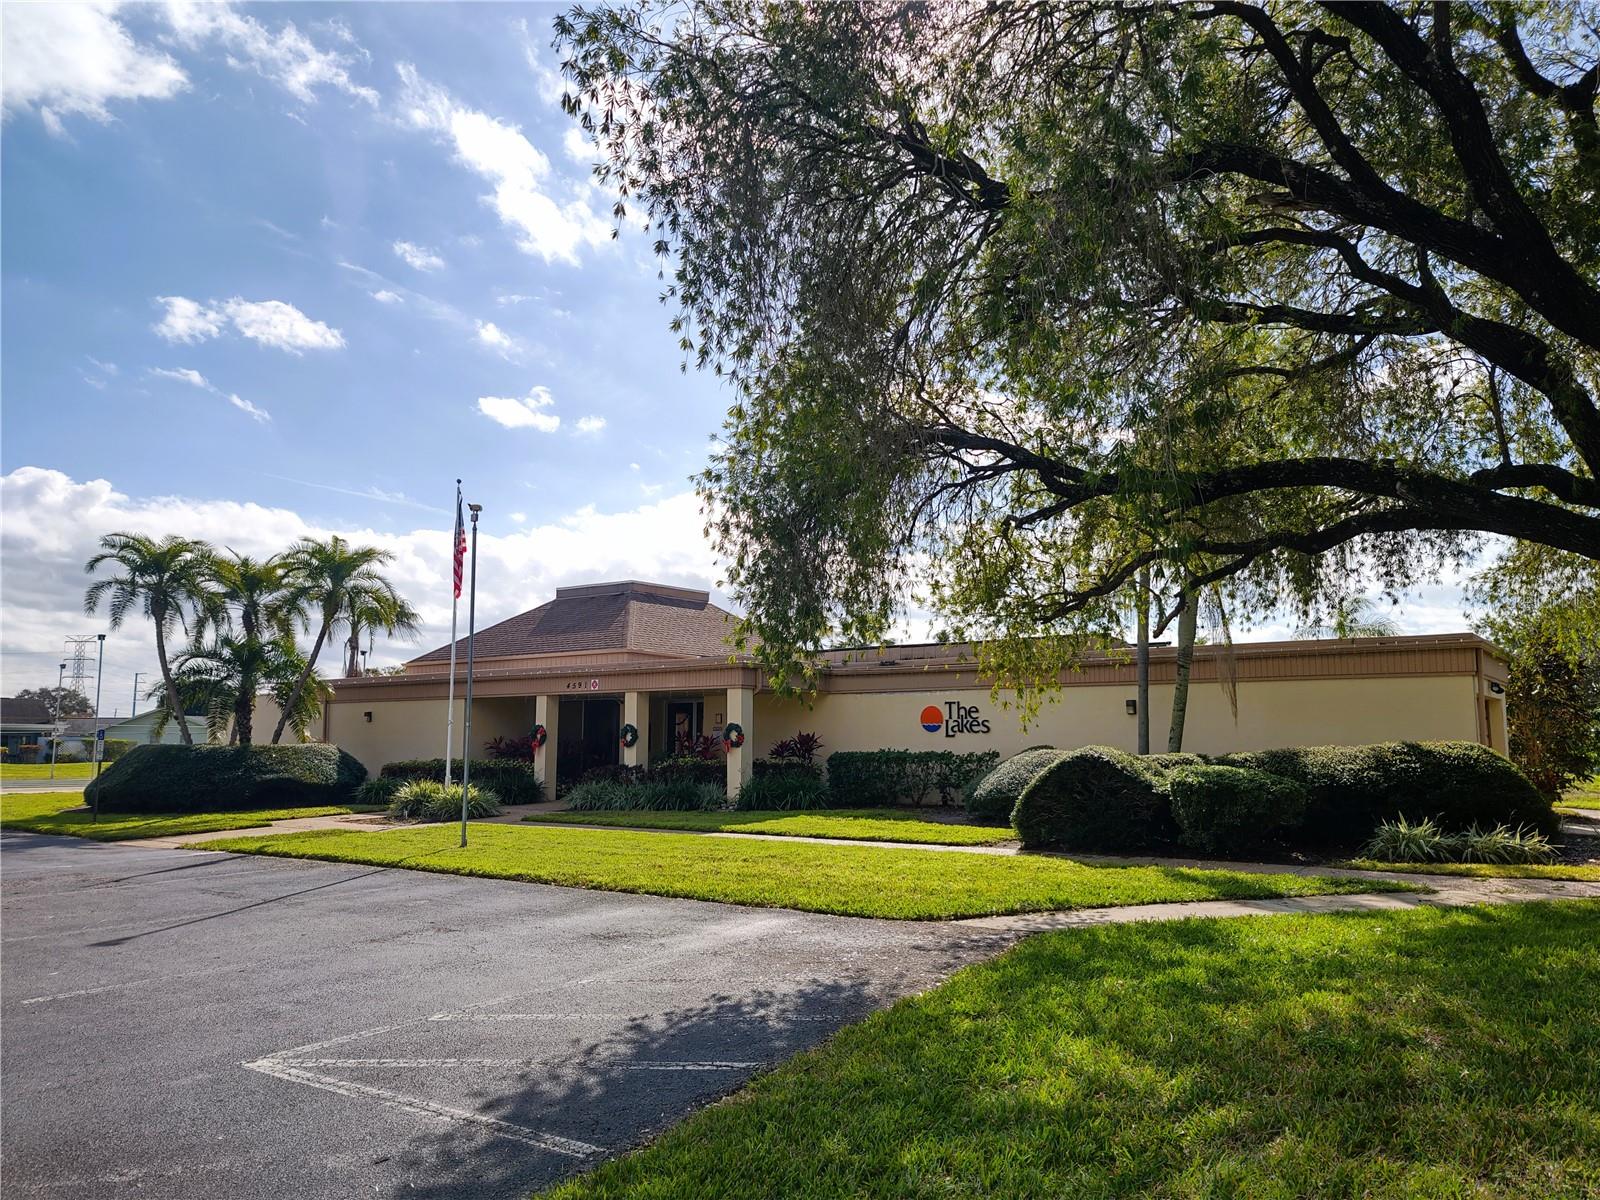 Lakes community clubhouse offer many activities and amenities for its residents.